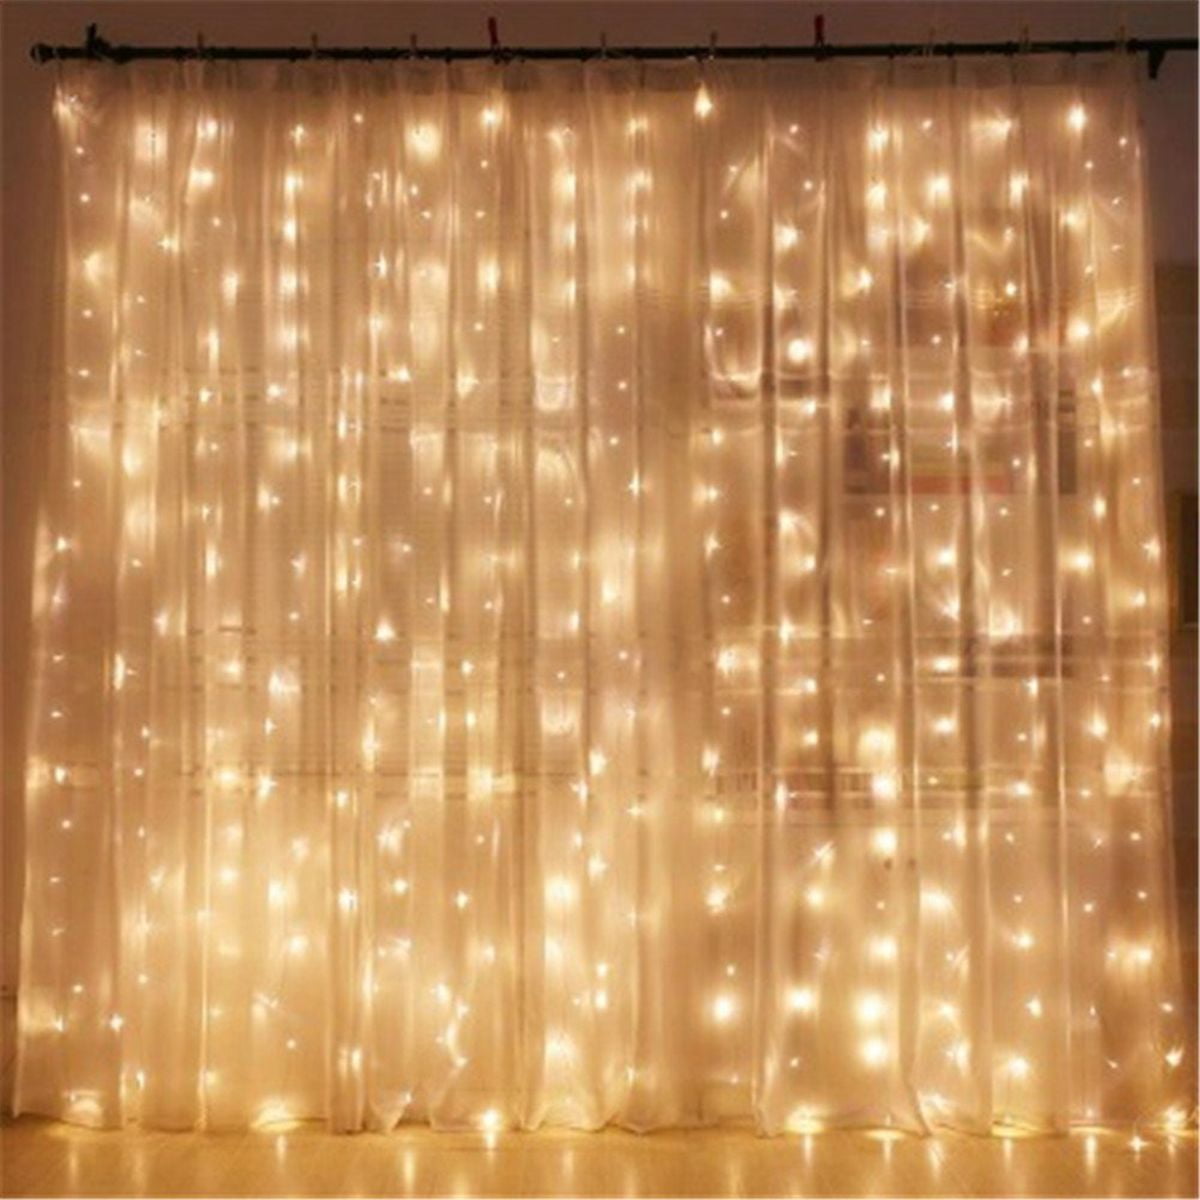 FANSIR 300 LED Curtain Lights Multicolor 3m x 3m 8 Modes Remote Control Fairy Light Waterproof LED Copper String Lights for Outdoor Indoor Wedding Party Garden Bedroom USB Window Lights